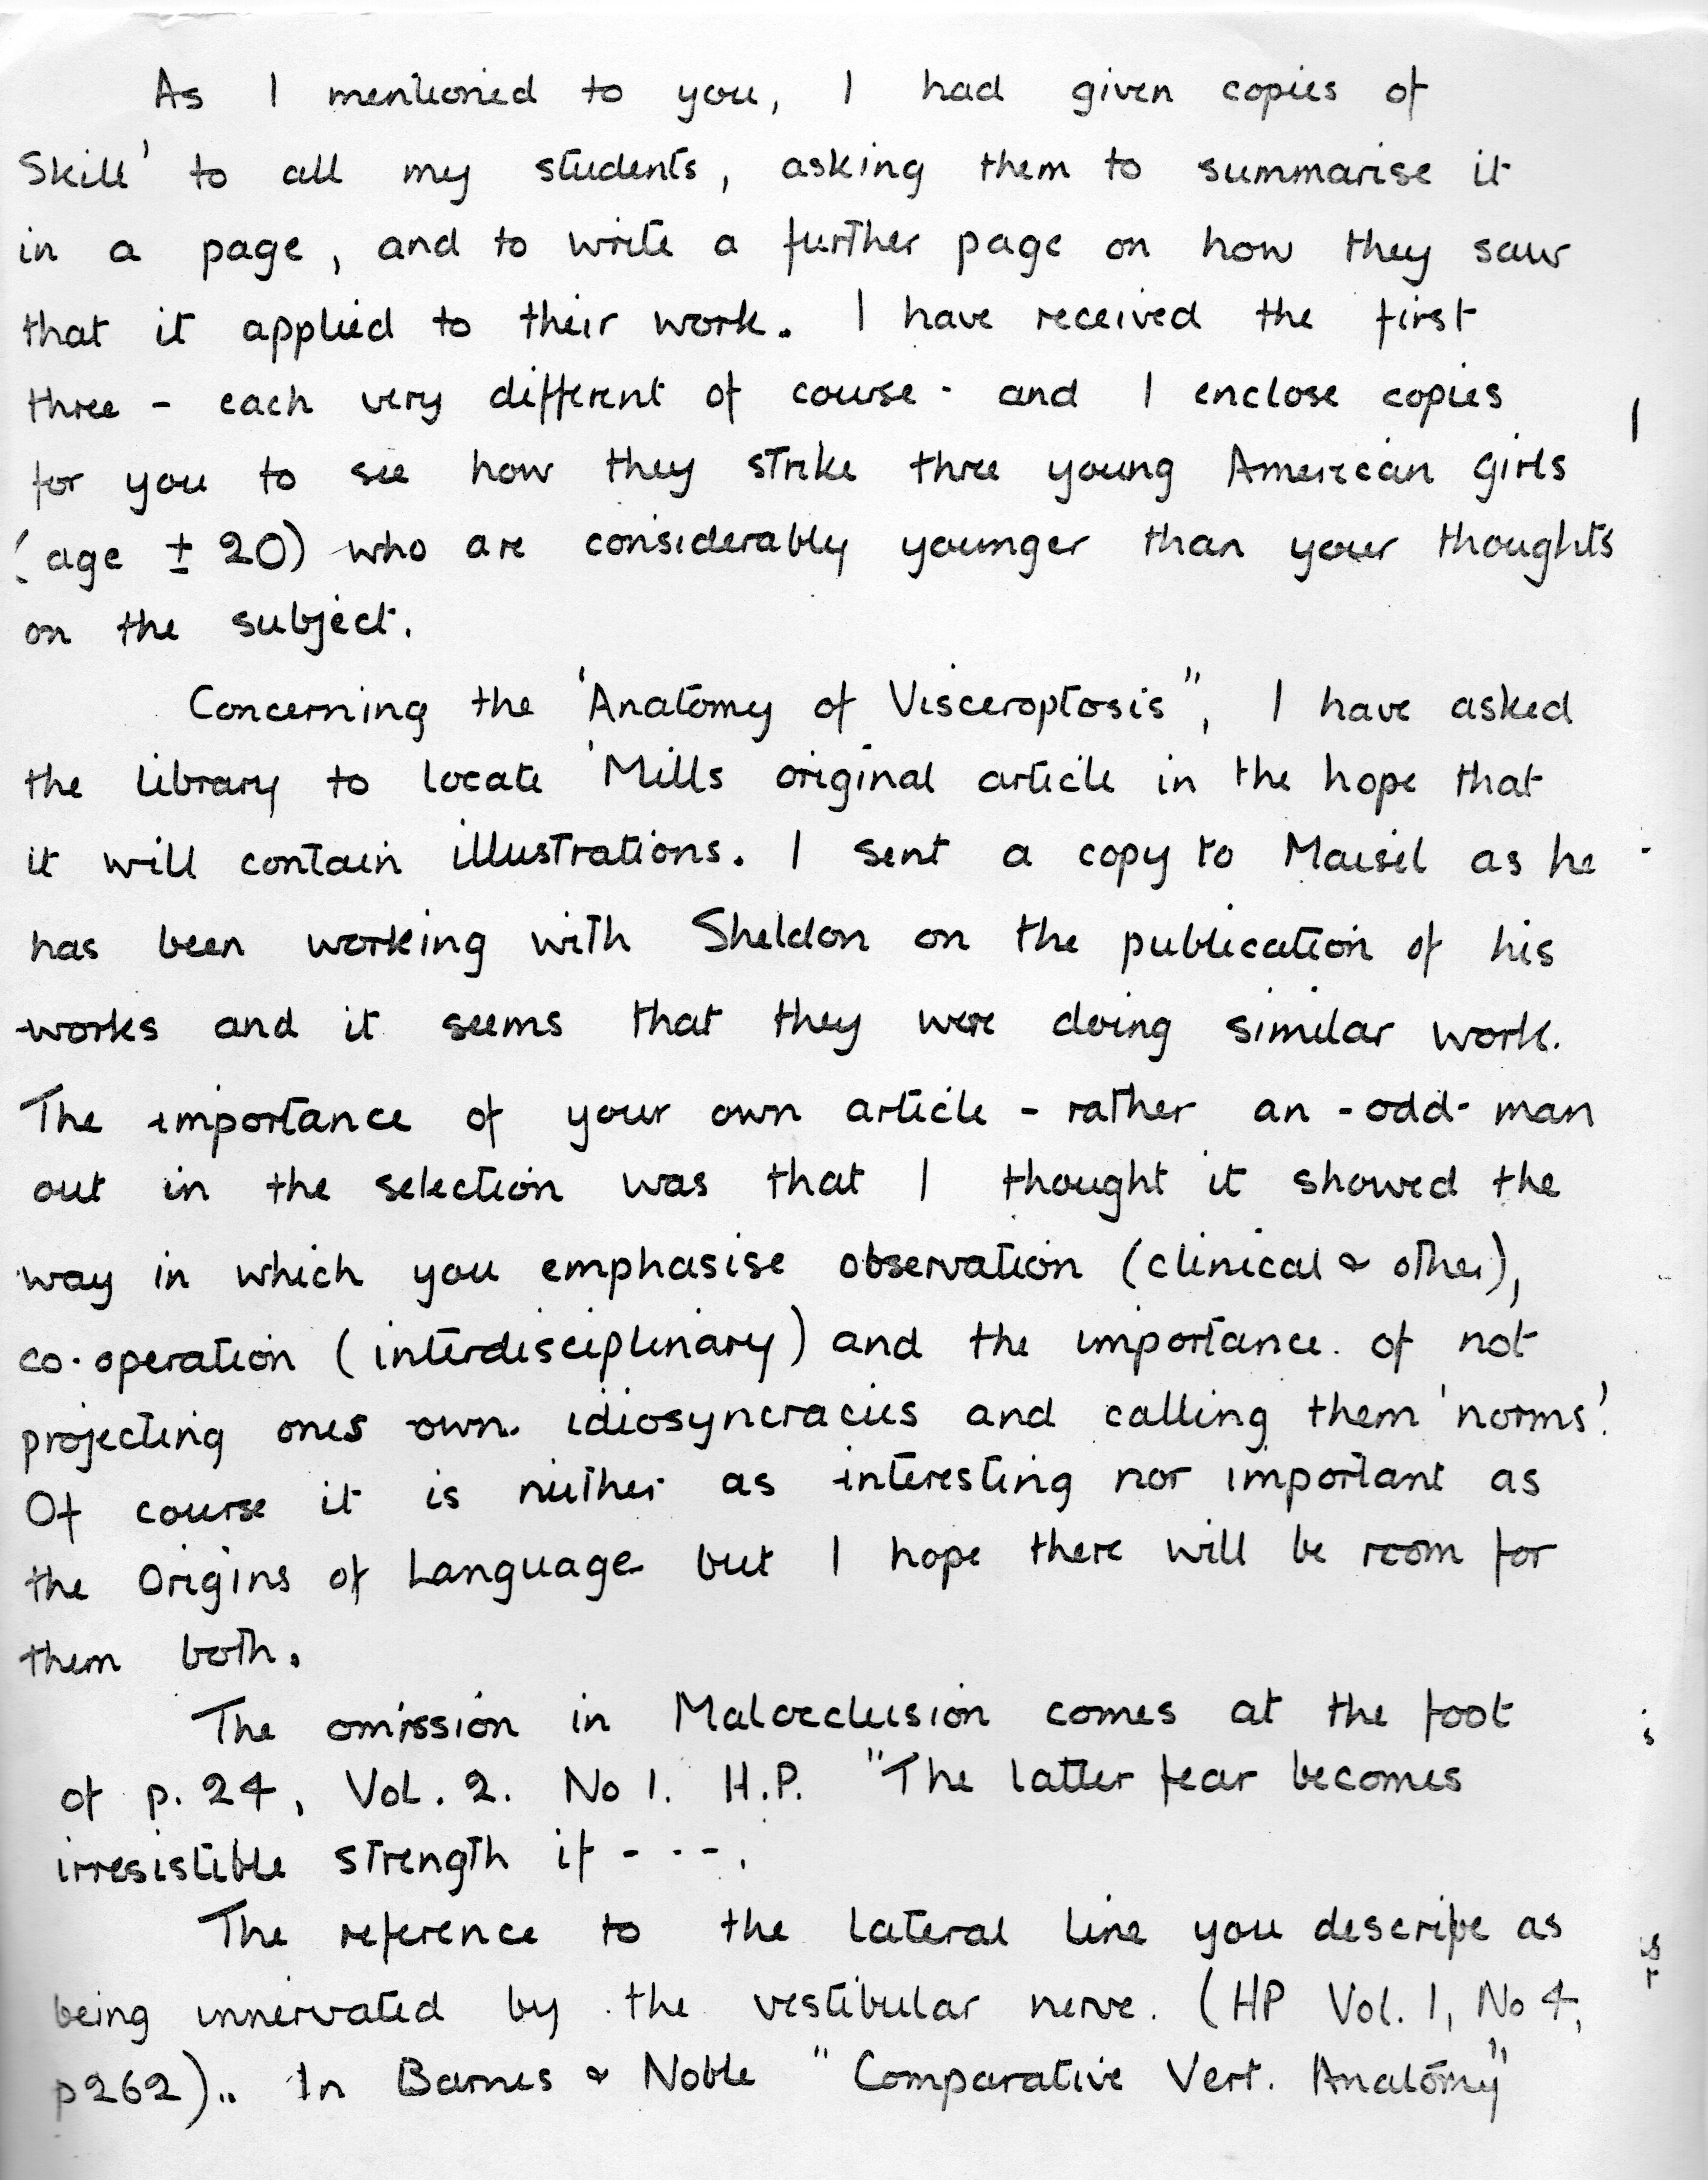 Page 2 of Dart letter to Murray. November 14, 1971.